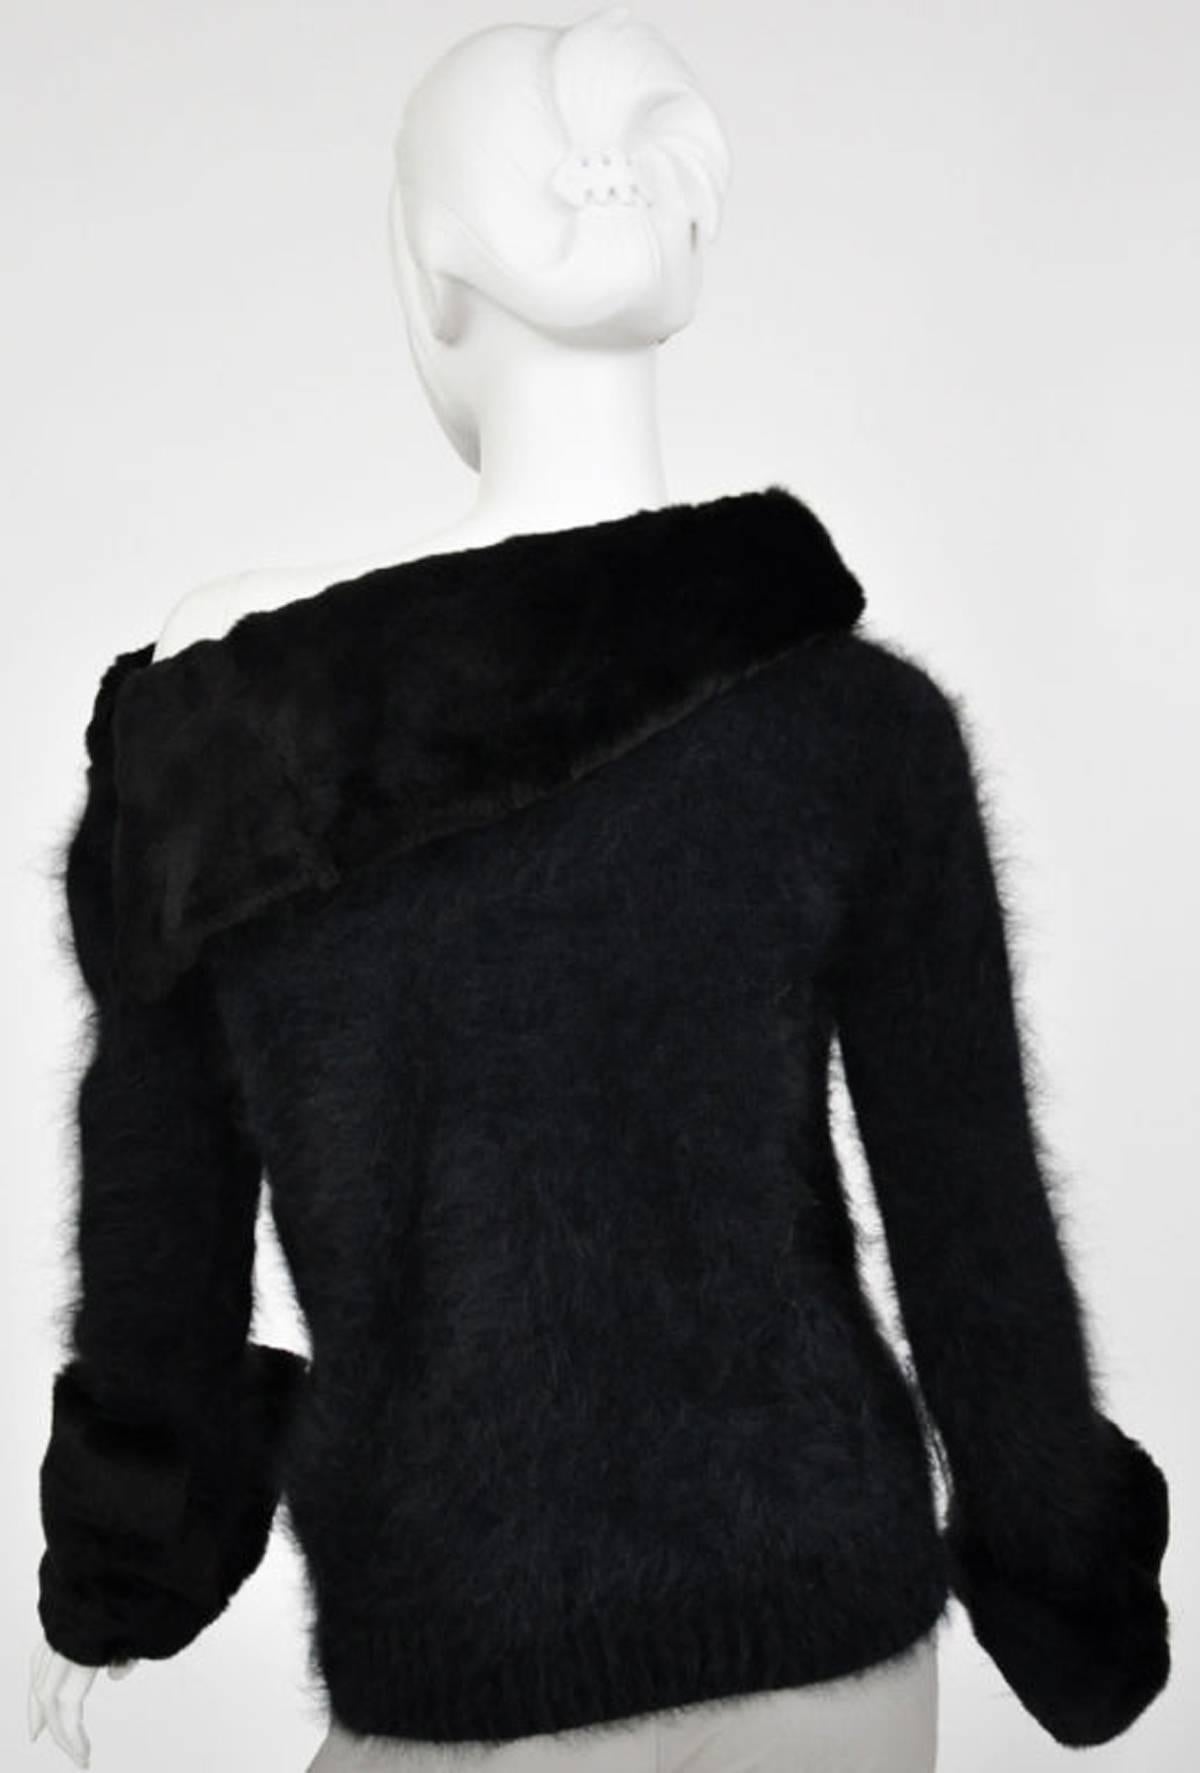 Tom Ford for Gucci Black Angora and Mink Fur Most Luxurious Sweater size S For Sale 2